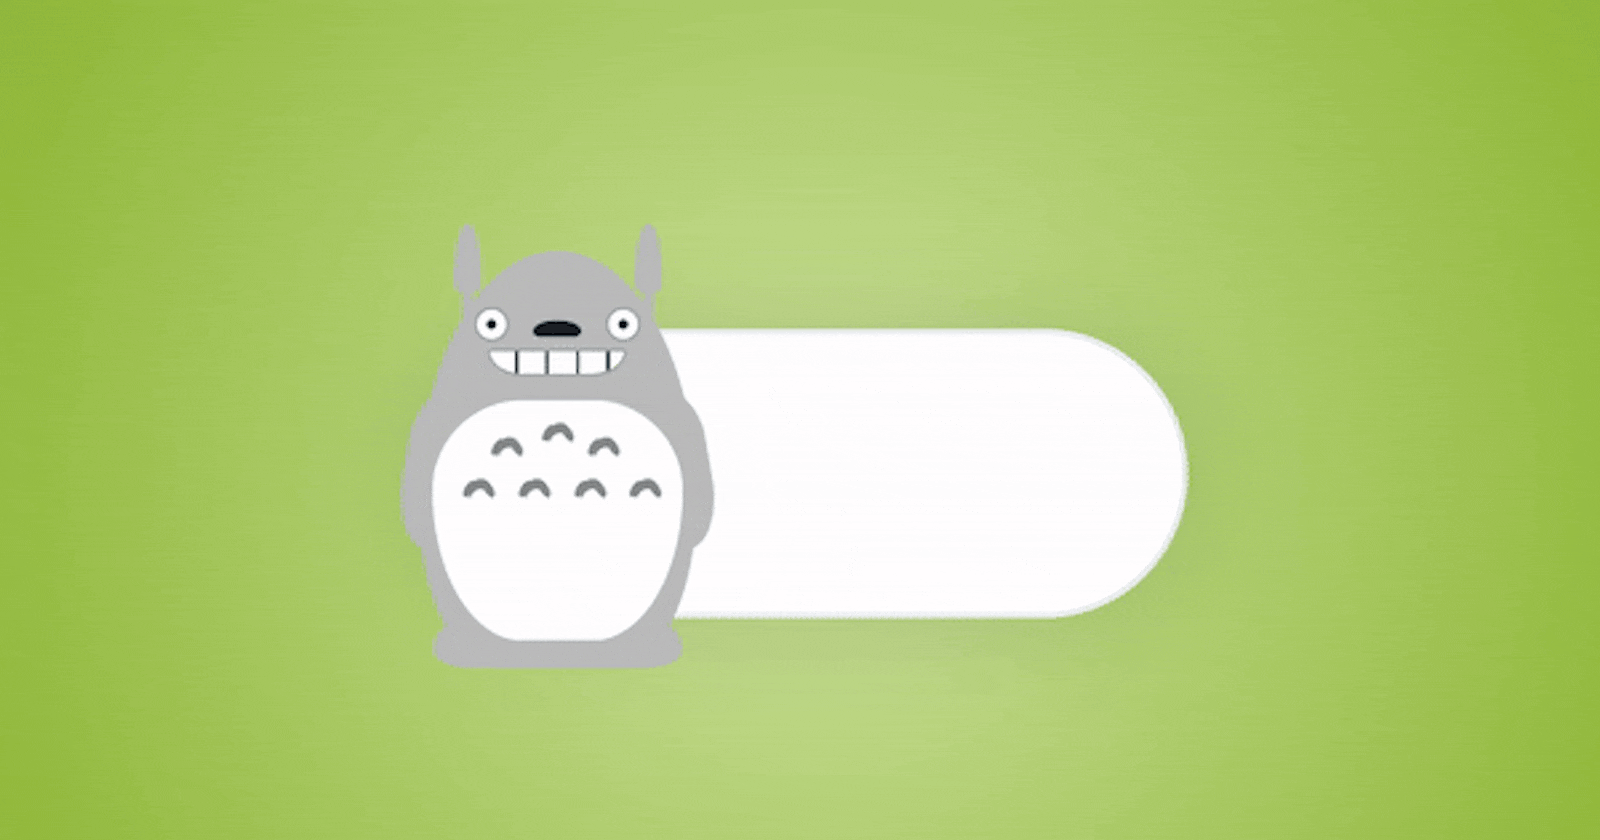 Building a Totoro Toggle Switch Using HTML and CSS